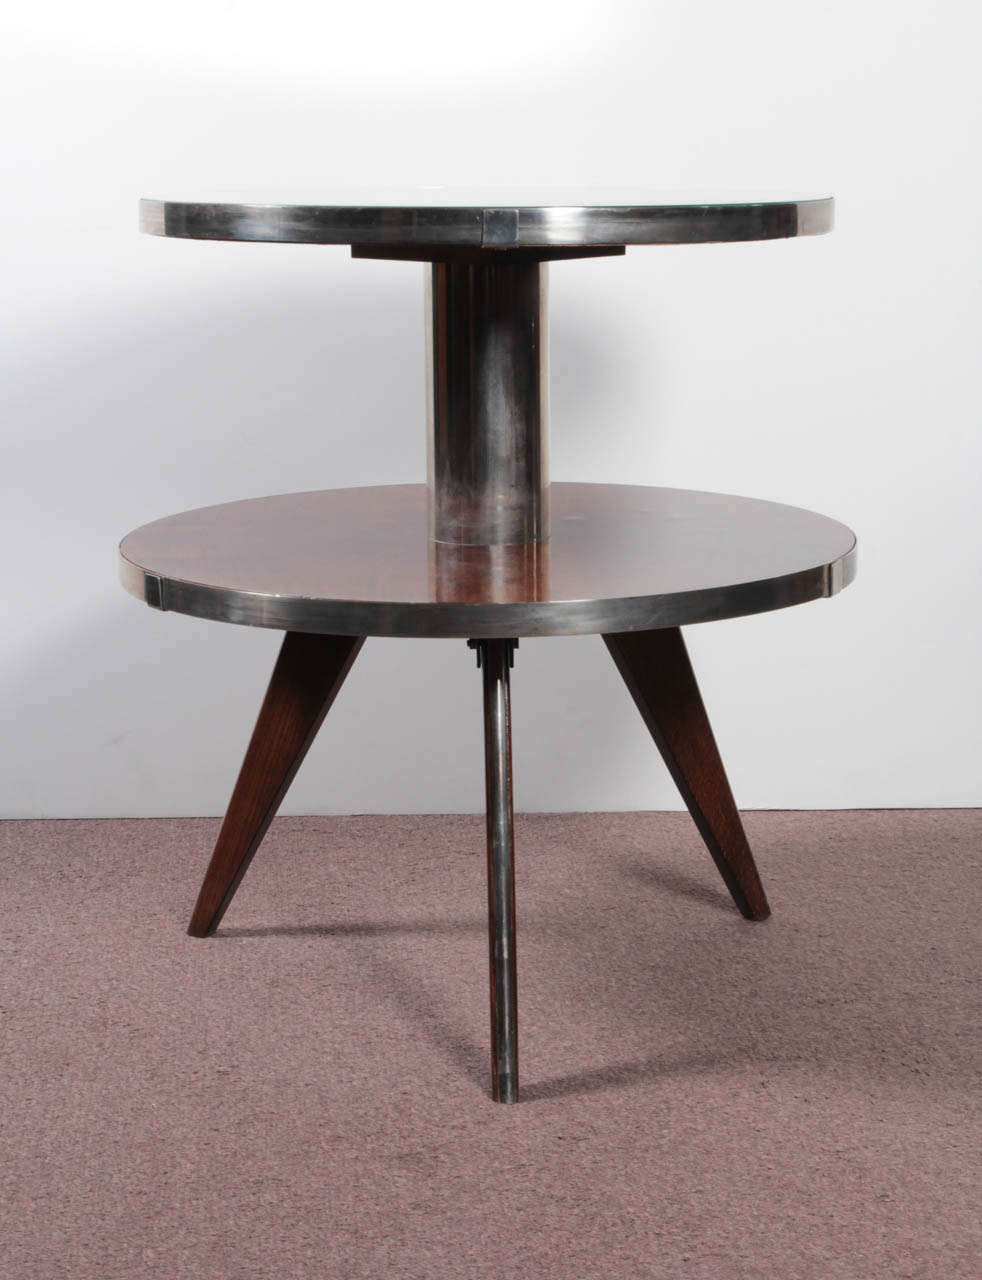 Sculptural French modernist 1940s two-tiered table in the style of Maurice Triboy. A circular mirrored top suspends effortlessly by a polished nickeled bronze column with circular bookmatched walnut stretcher shelf banded with nickeled bronze. Both